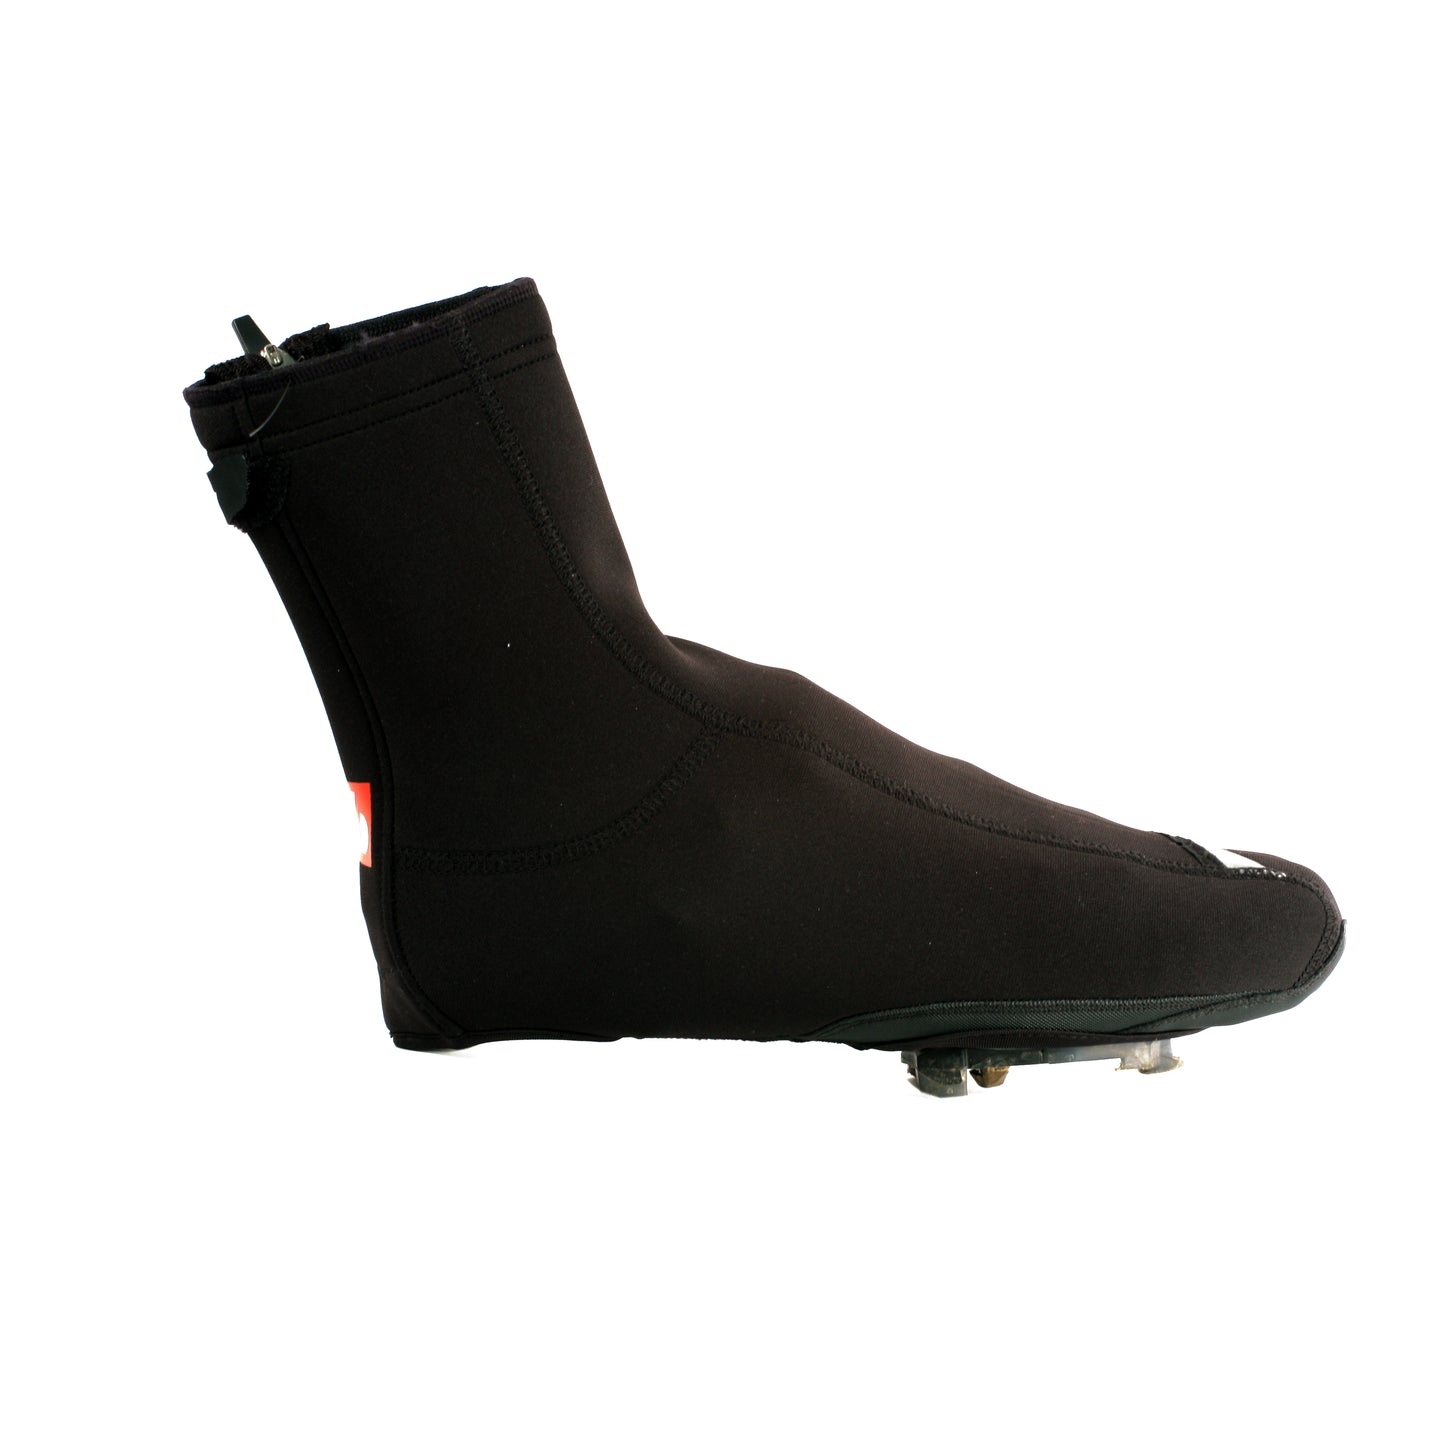 BSP-03 Cycling covershoes, Warm and water-repellent.